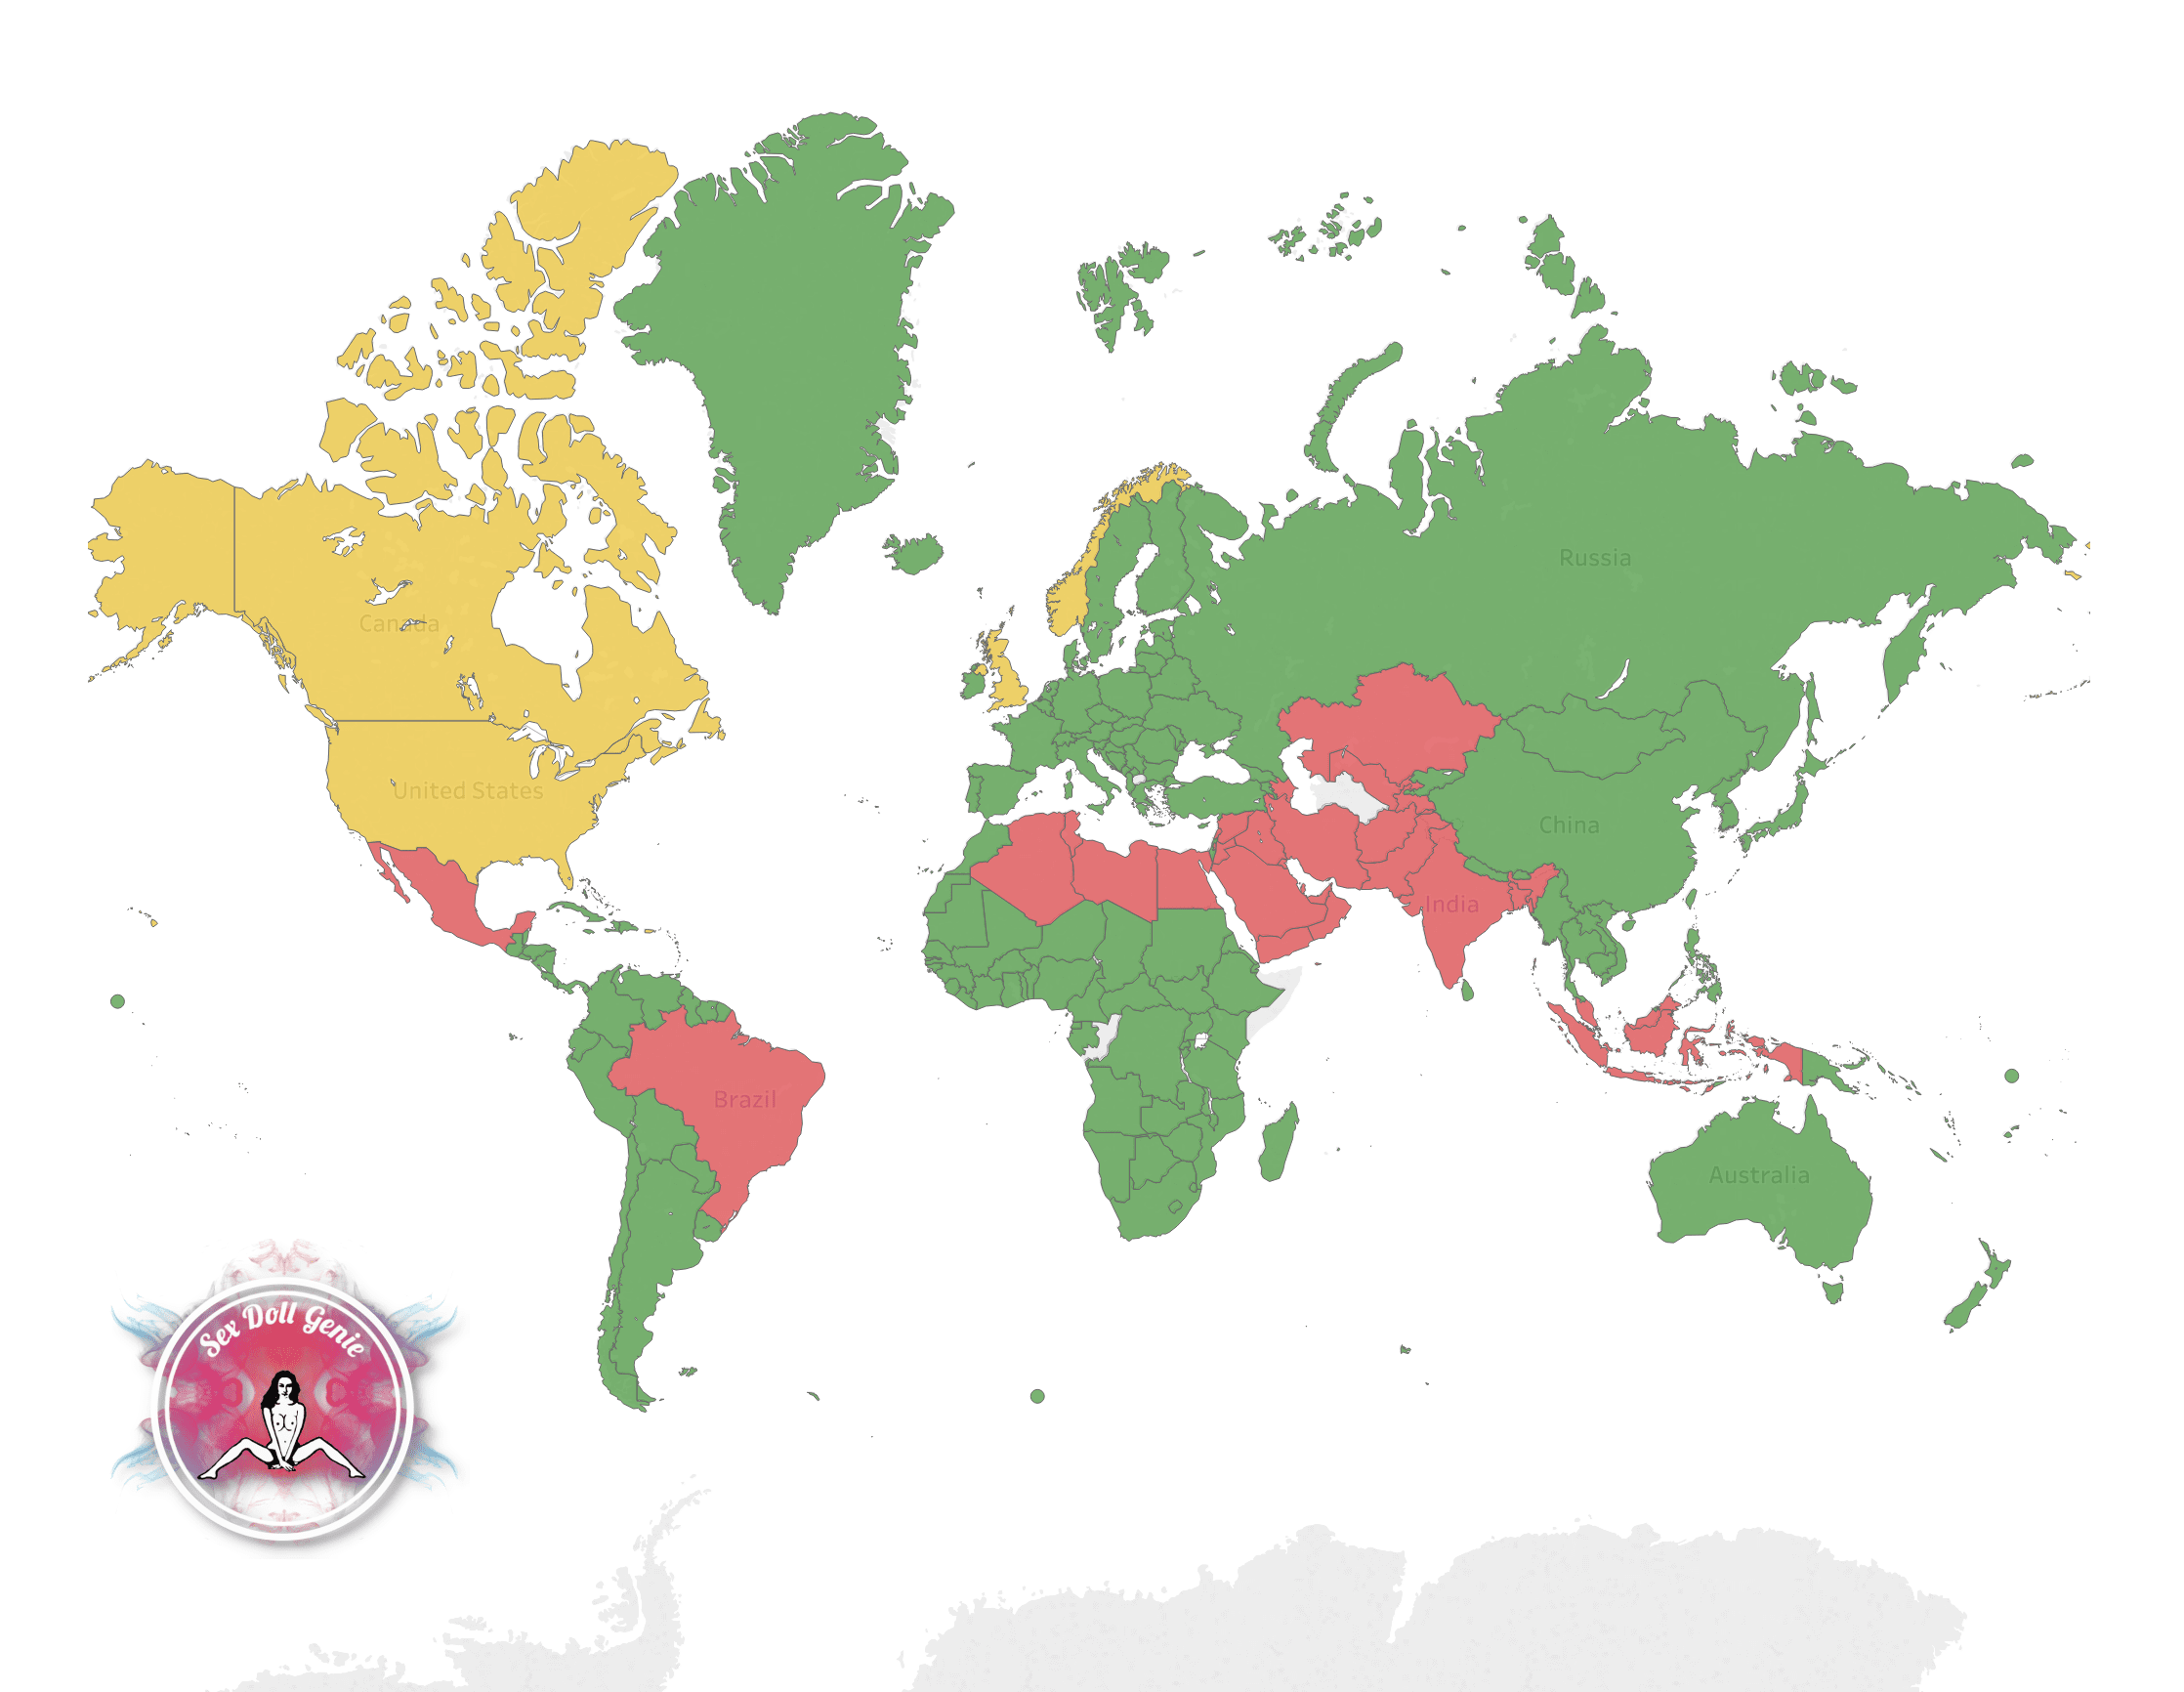 Where In the World Can You Legally Import Sex Dolls? INFOGRAPHIC